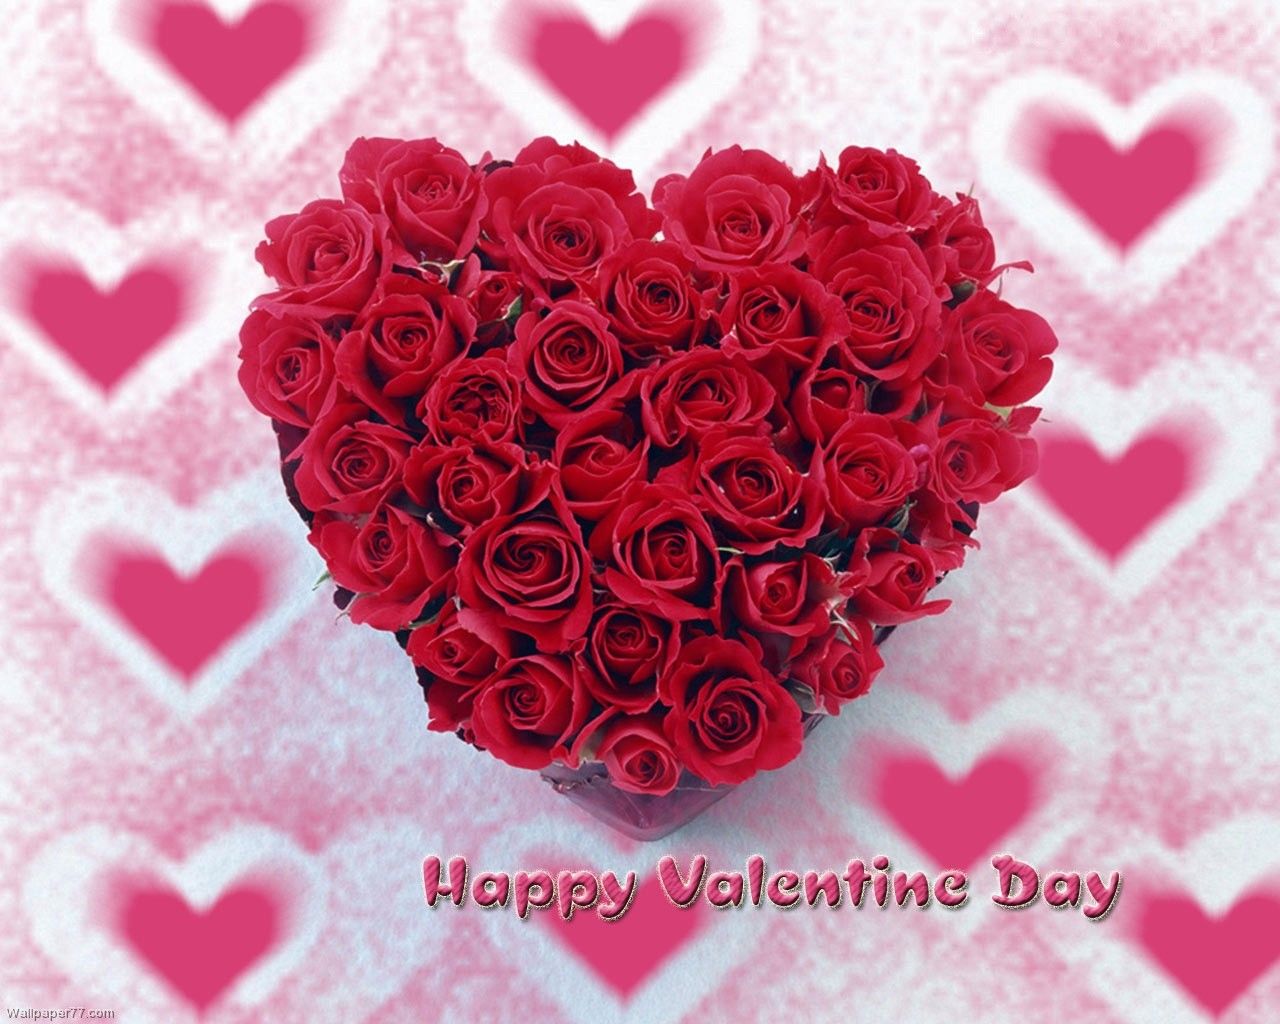 Happy Valentine's Day With Flowers - HD Wallpaper 